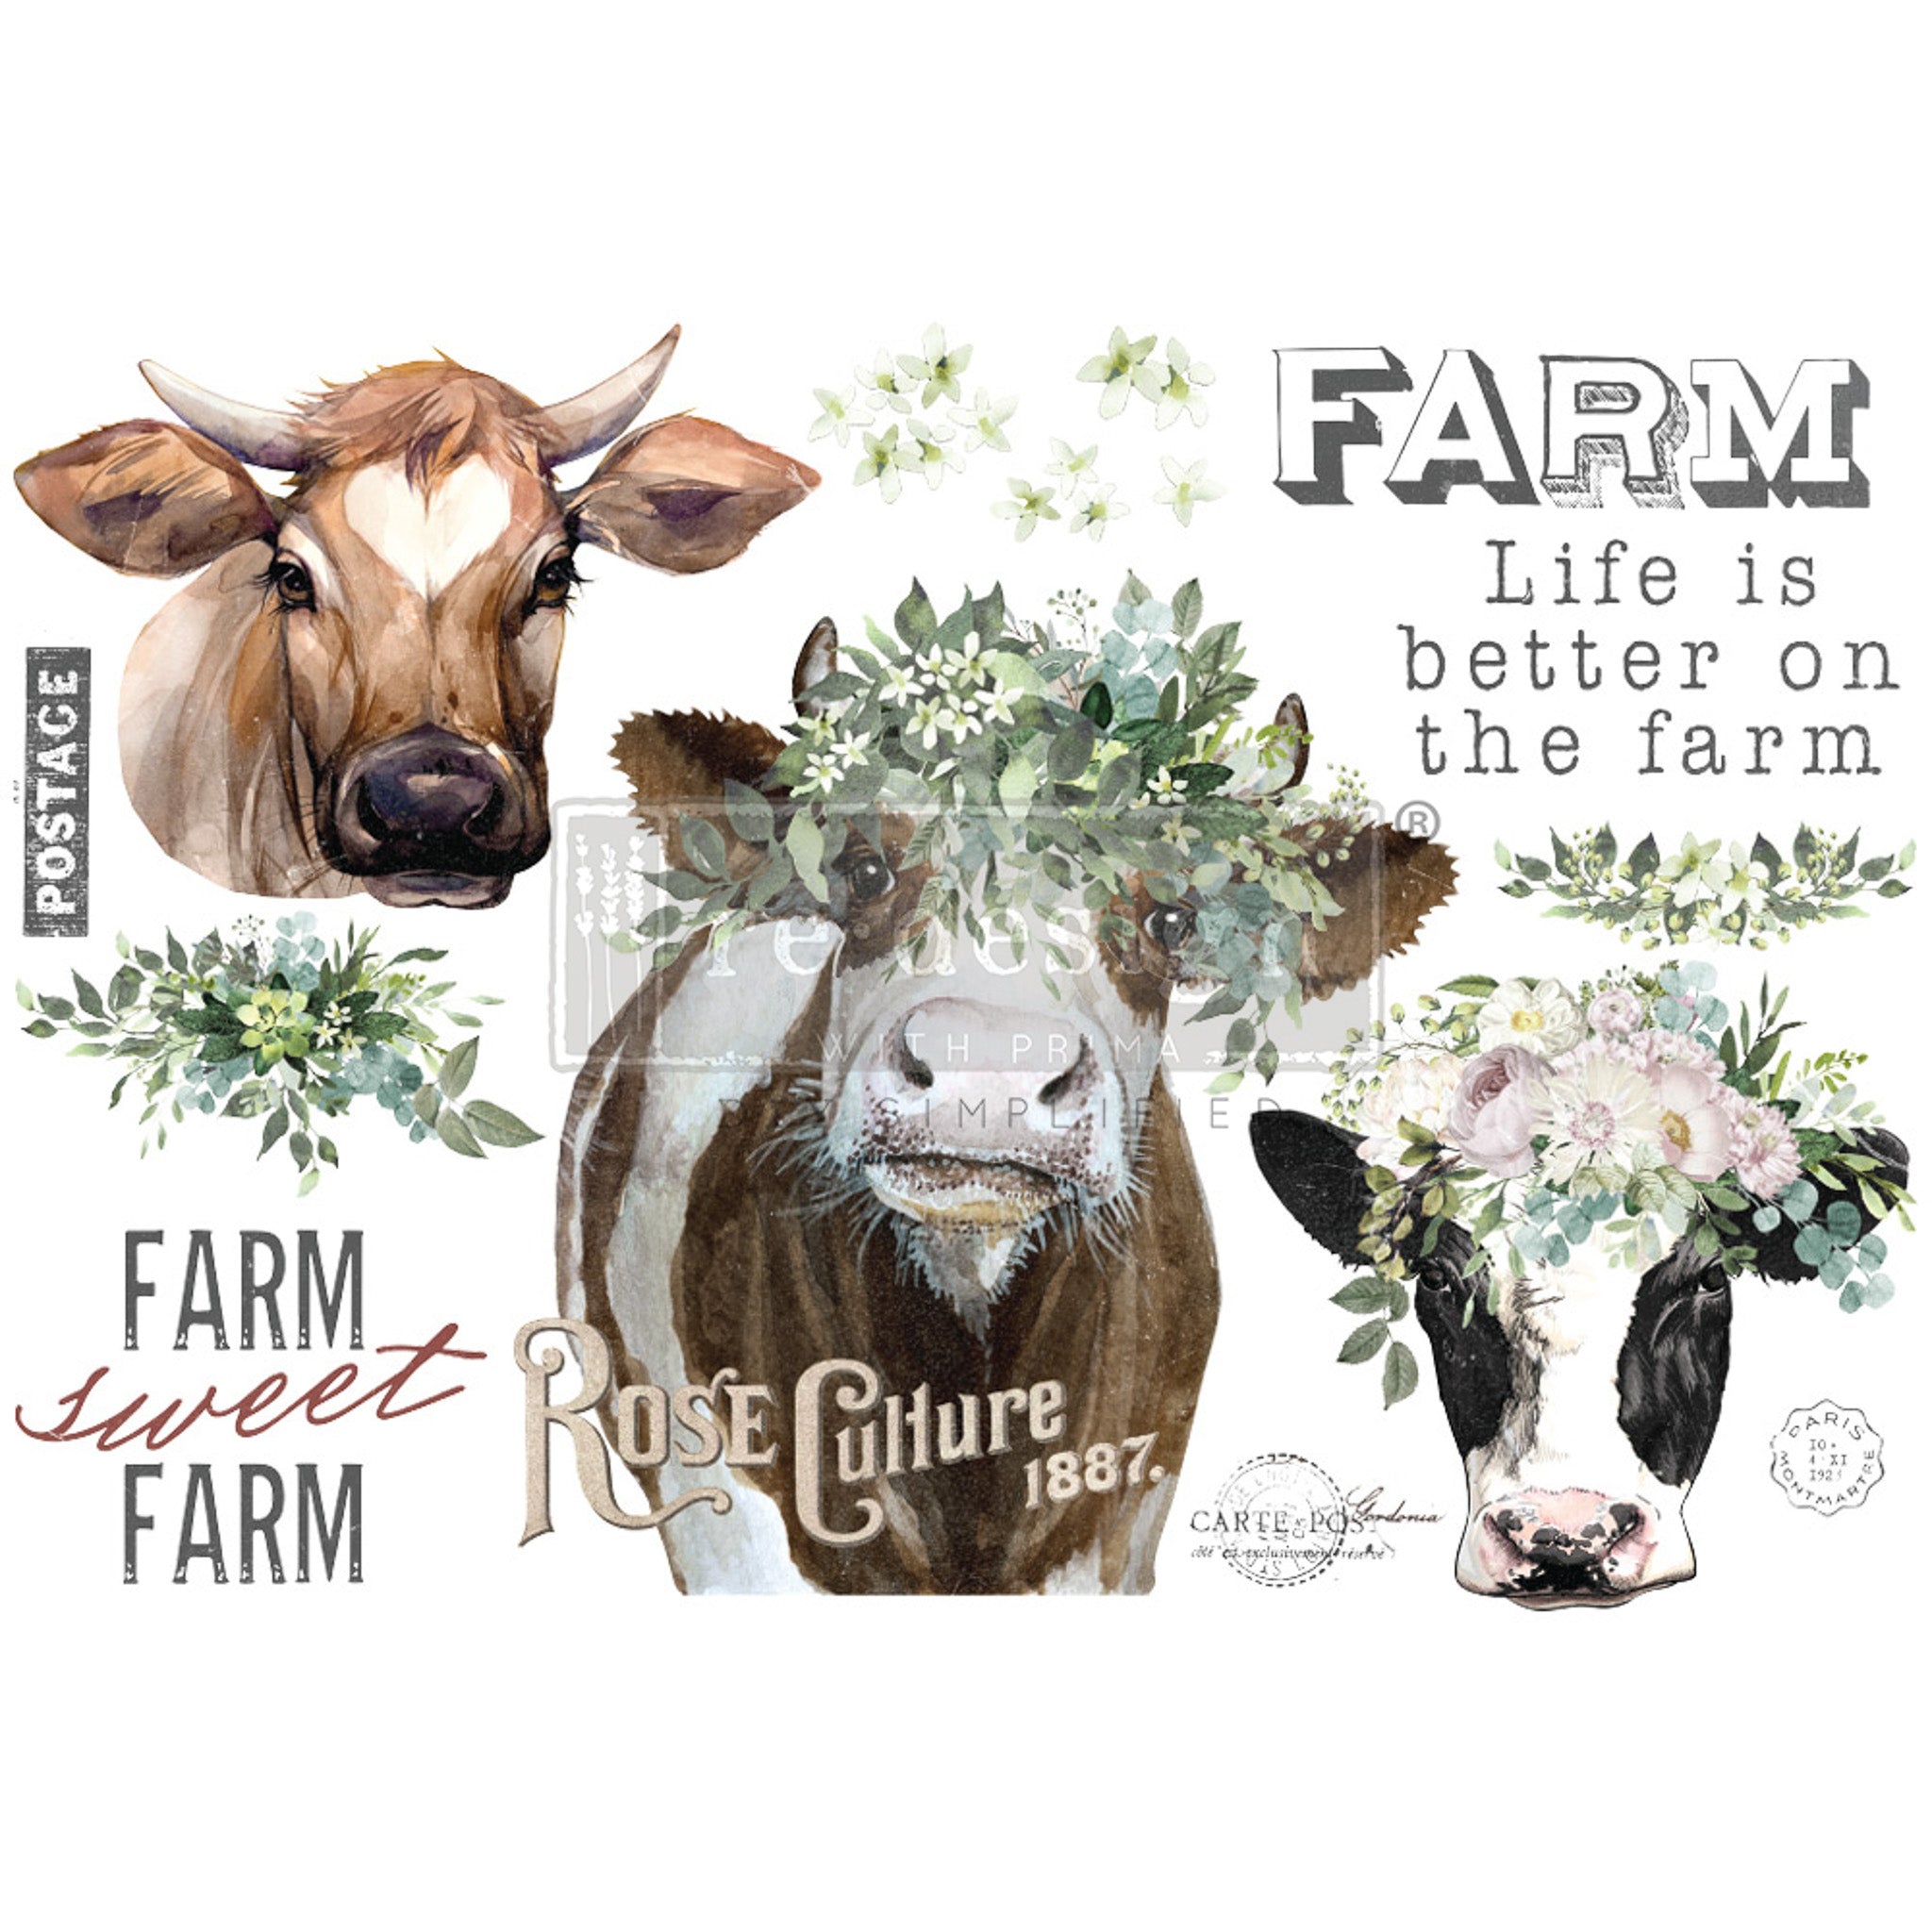 Rub-on transfer design featuring two cows wearing floral crowns and a cow with a heart adorning her forehead, along with charming flower bouquets and farm-inspired quotes.